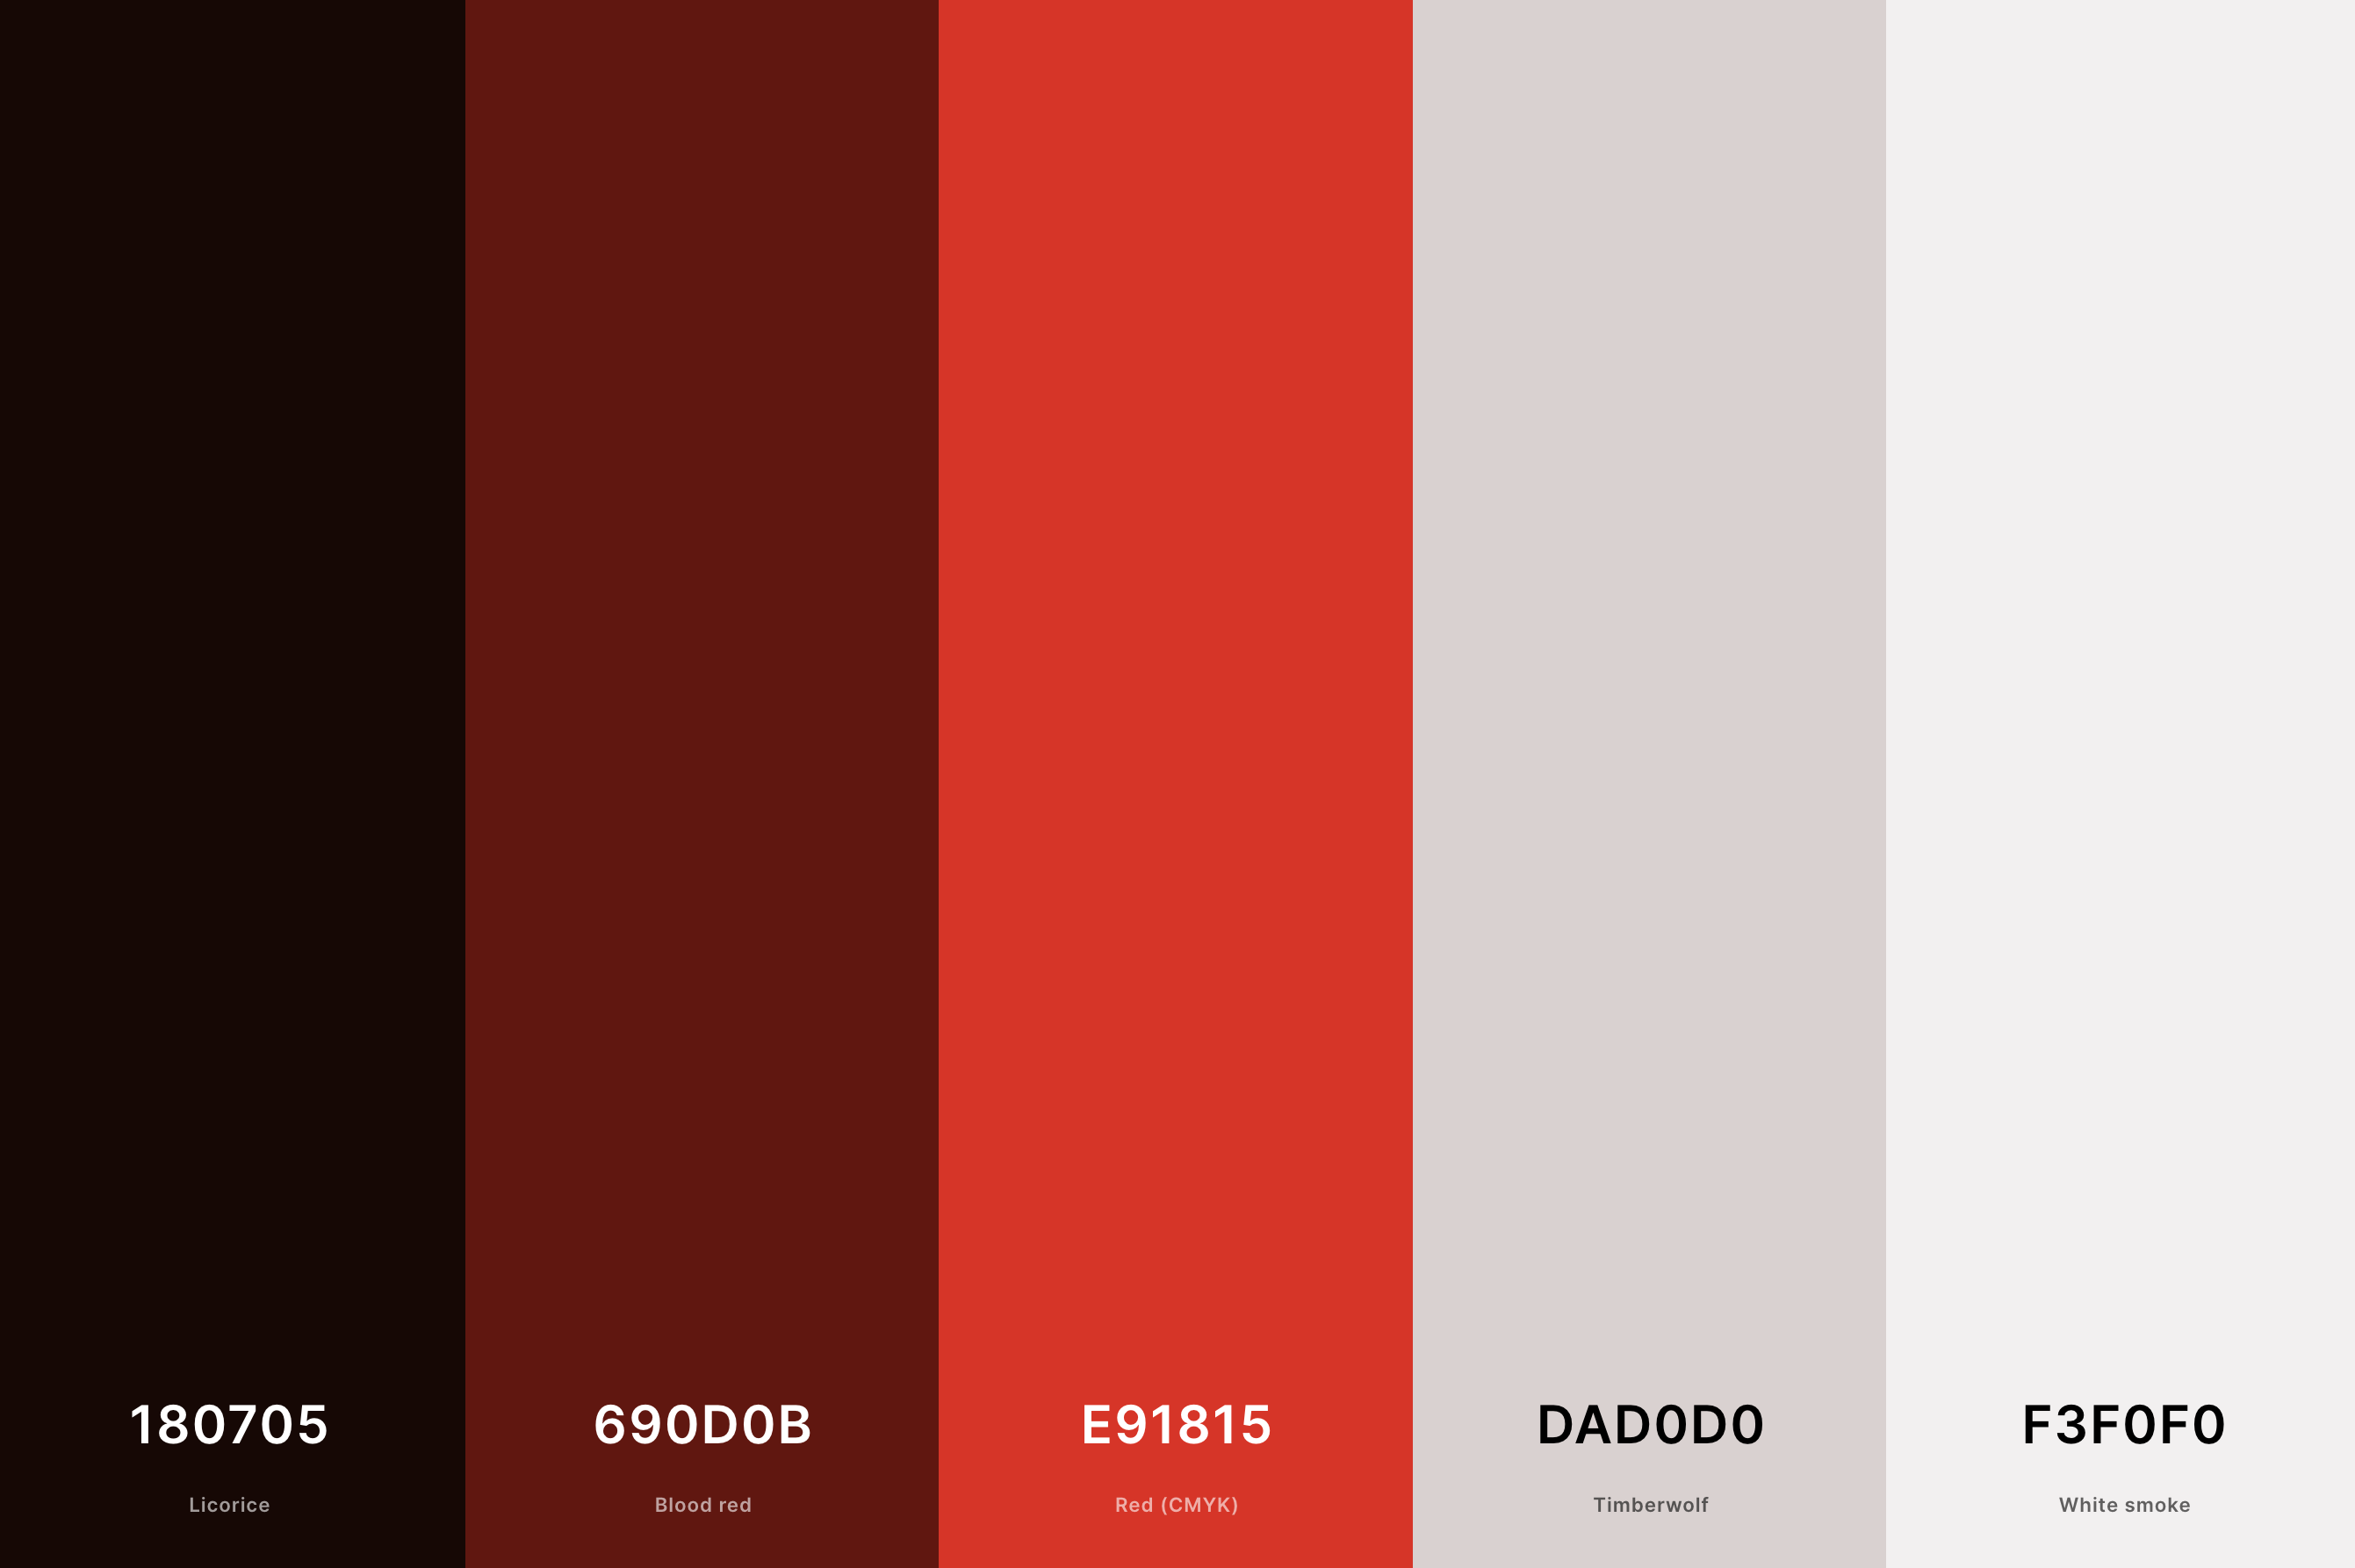 16. Red, Black And White Color Palette Color Palette with Licorice (Hex #180705) + Blood Red (Hex #690D0B) + Red (Cmyk) (Hex #E91815) + Timberwolf (Hex #DAD0D0) + White Smoke (Hex #F3F0F0) Color Palette with Hex Codes